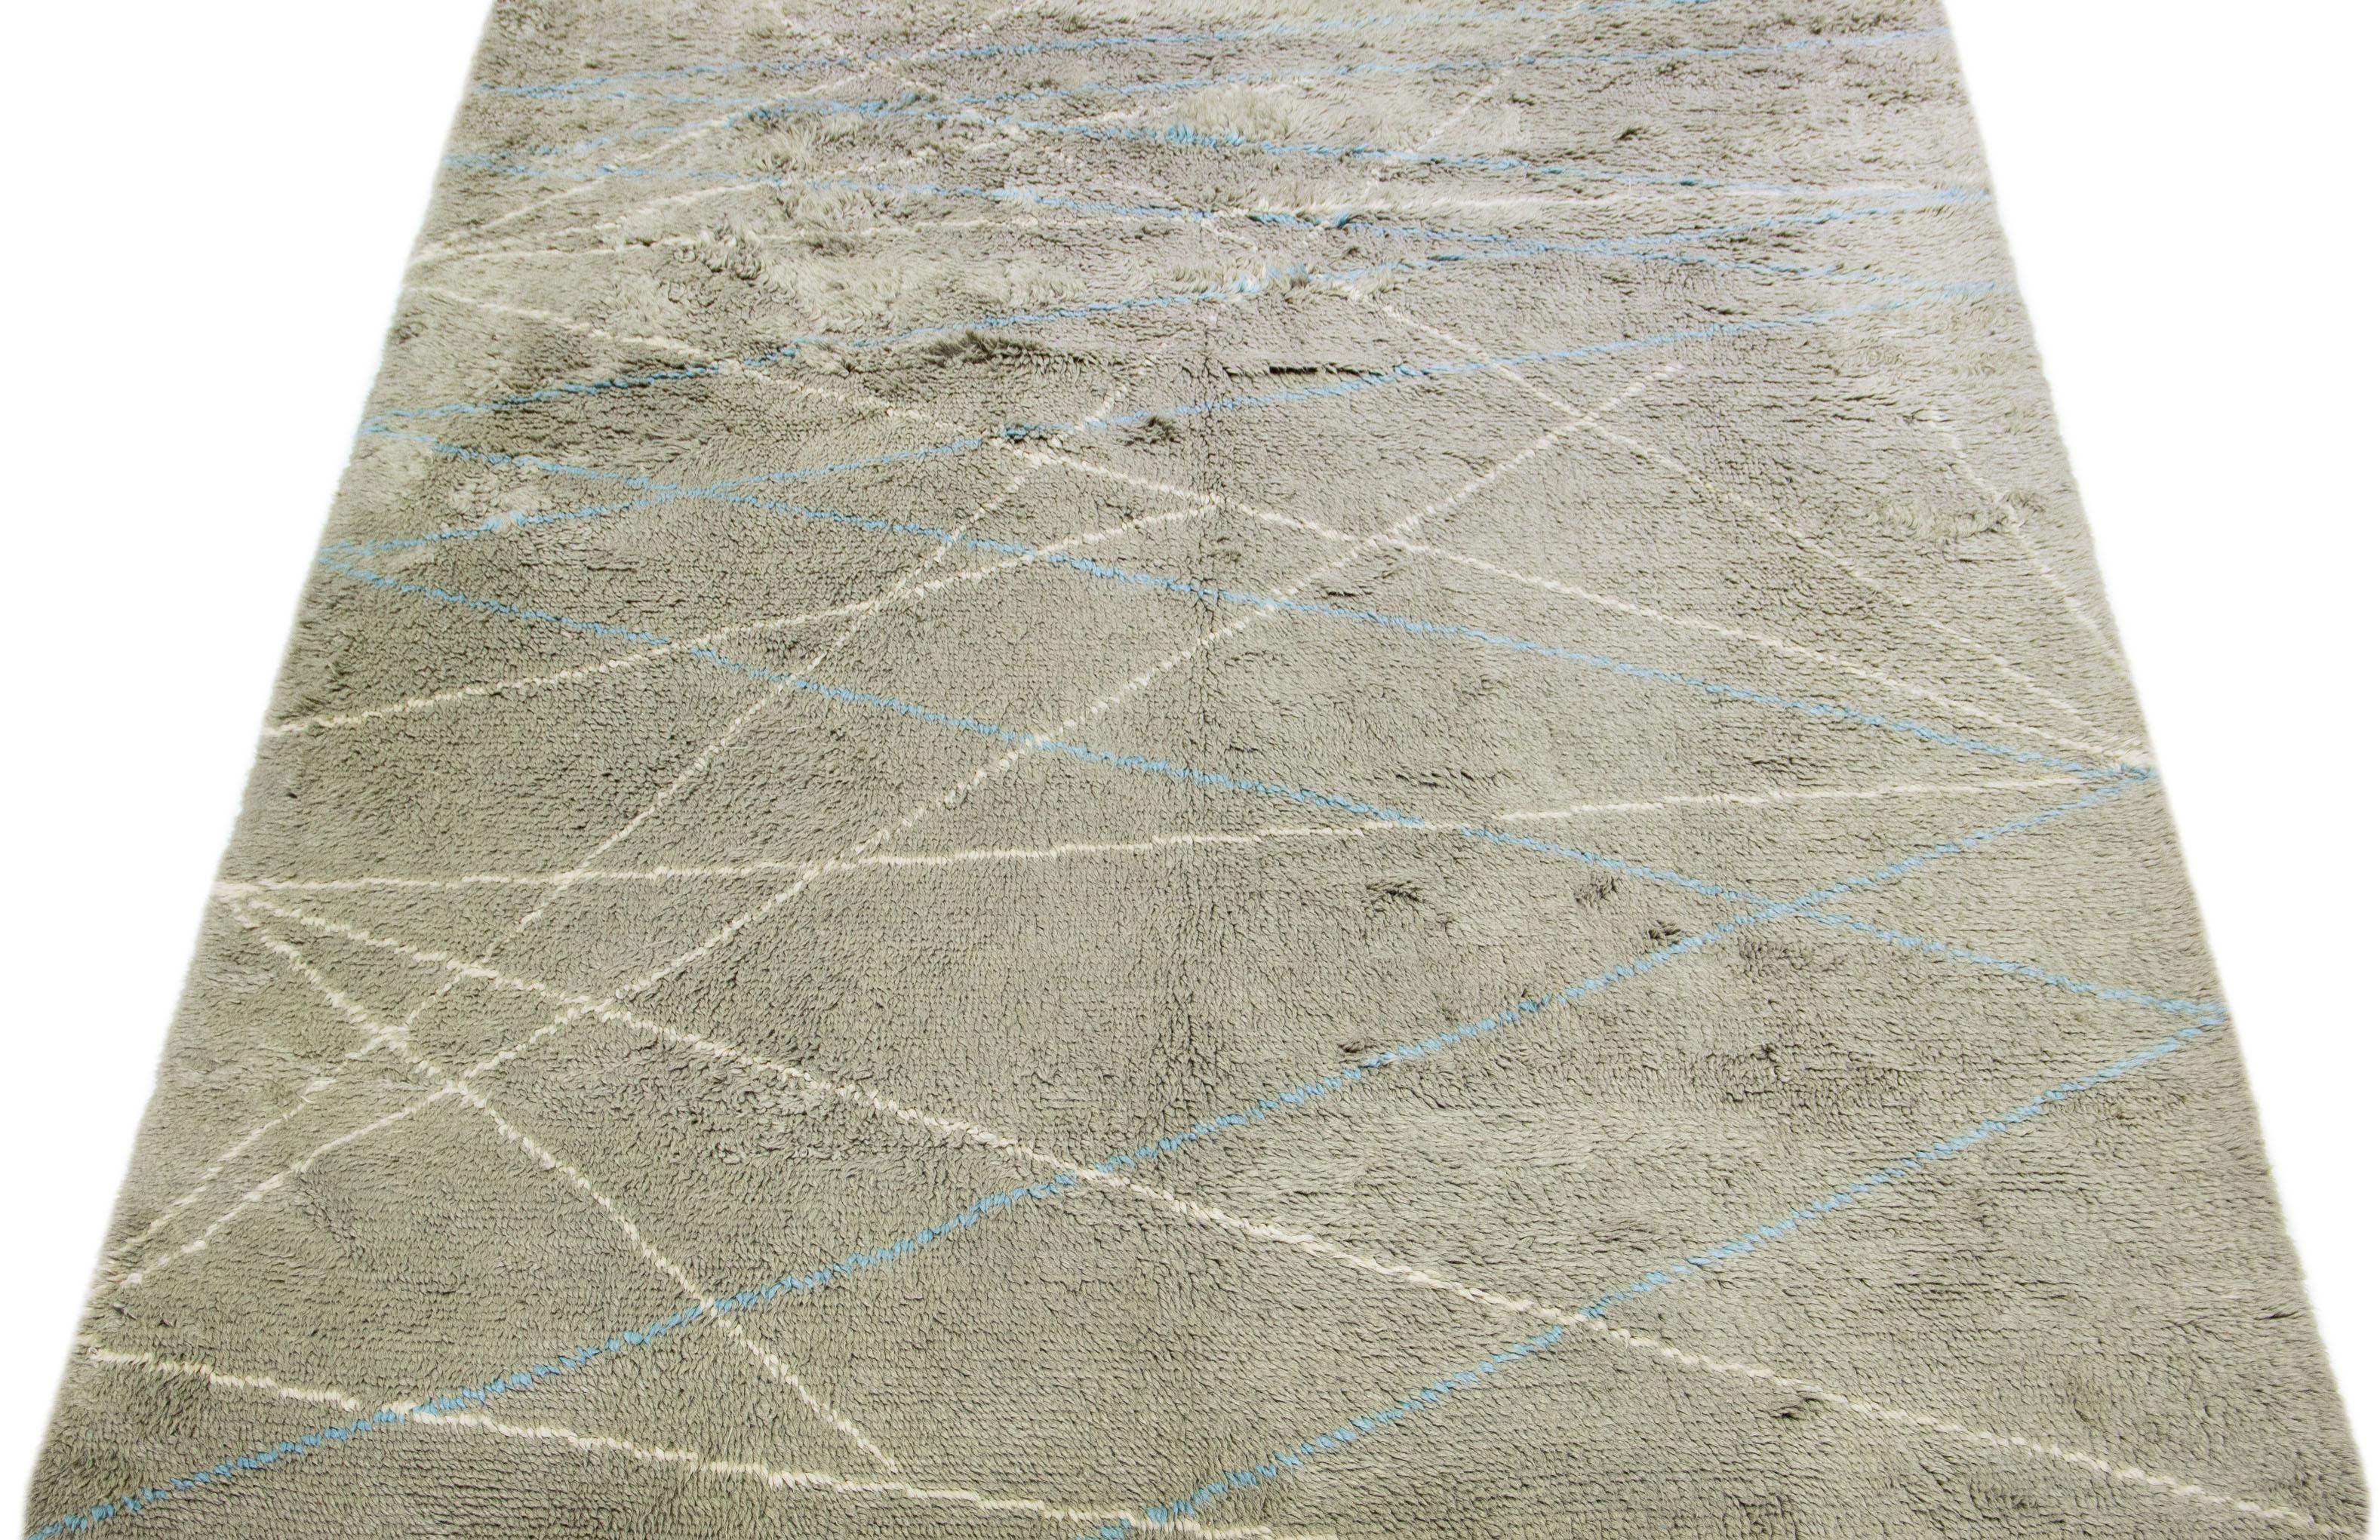 Hand-knotted with the finest wool, this Moroccan-inspired rug boasts a captivating tribal design on a gray base, accentuated with serene hues of blue and ivory.

This rug measures 9' x 12'.

Our rugs are professional cleaning before shipping.